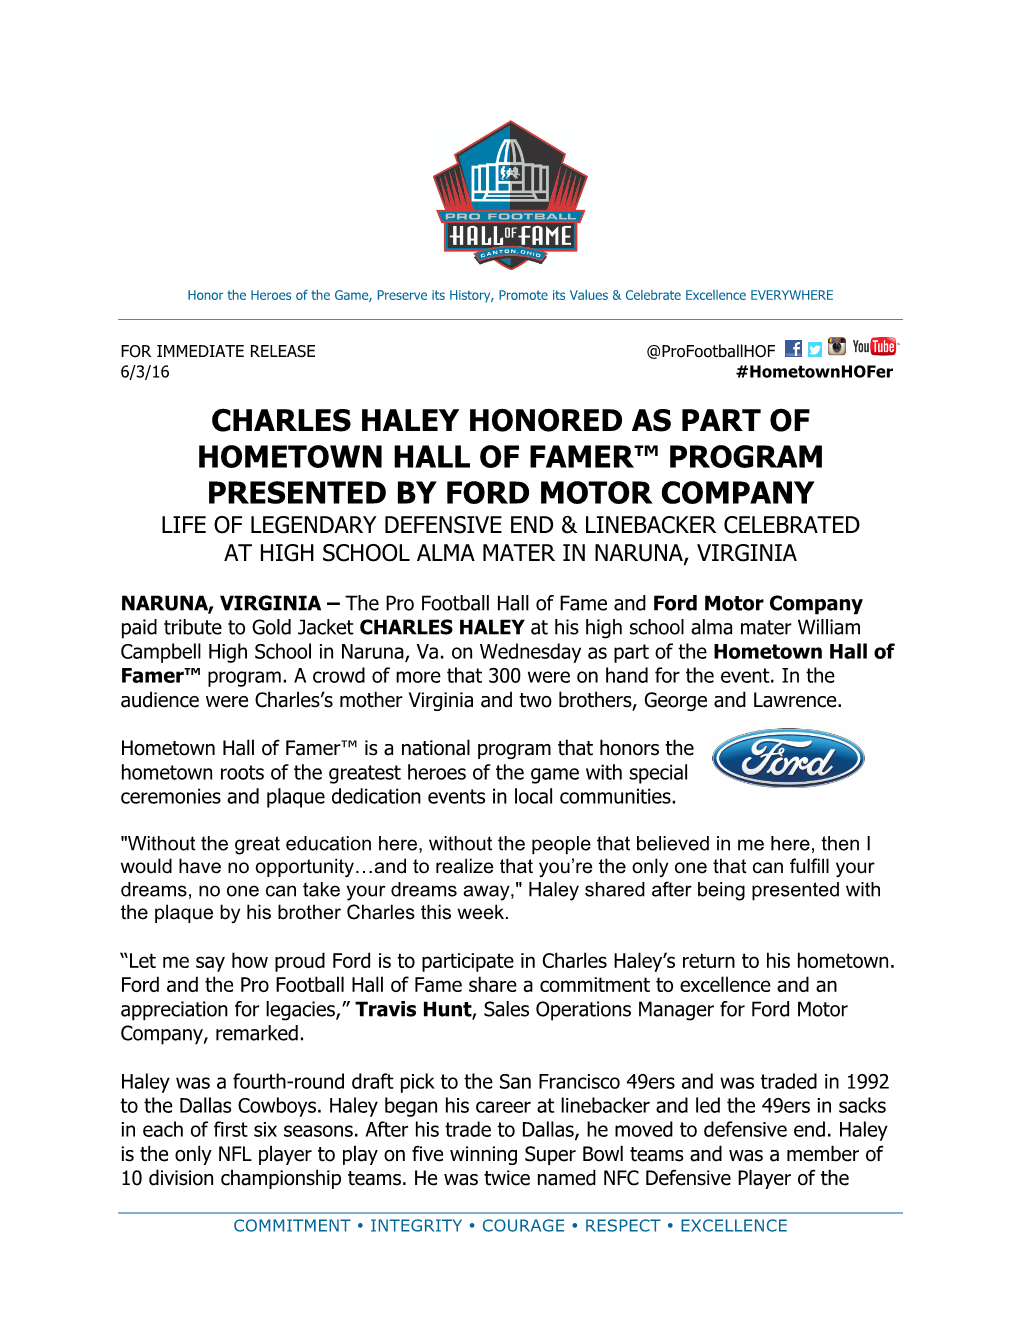 Charles Haley Honored As Part of Hometown Hall of Famer™ Program Presented by Ford Motor Company